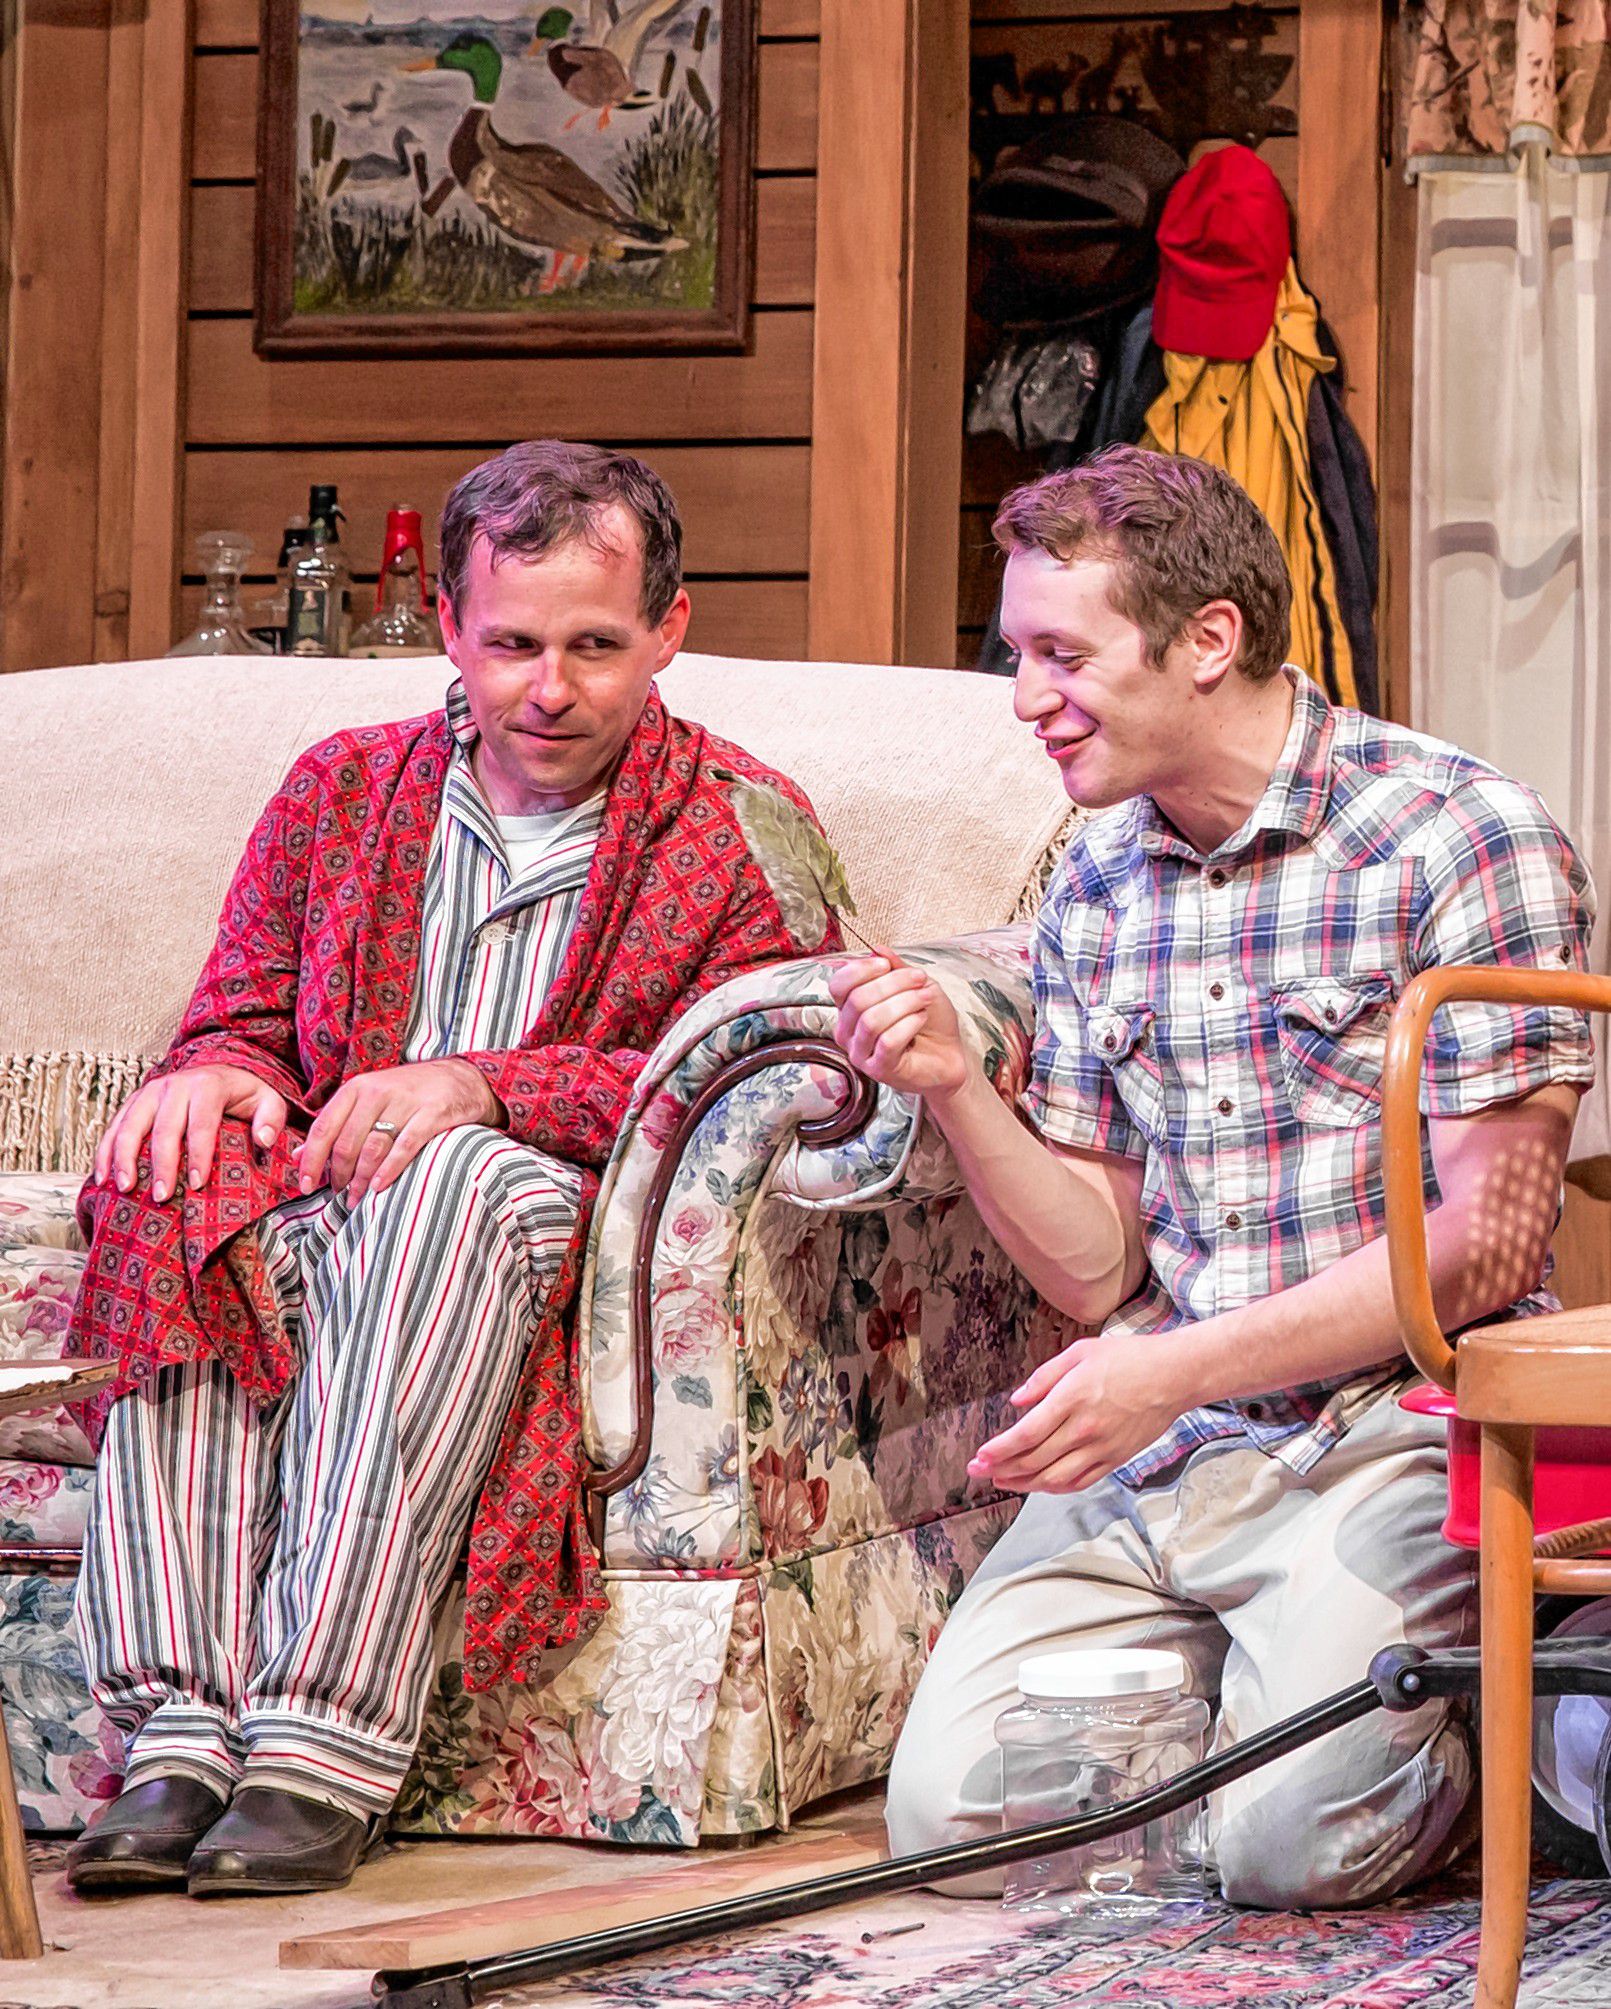 Stagestruck: The Foreigner Hits Close To Home